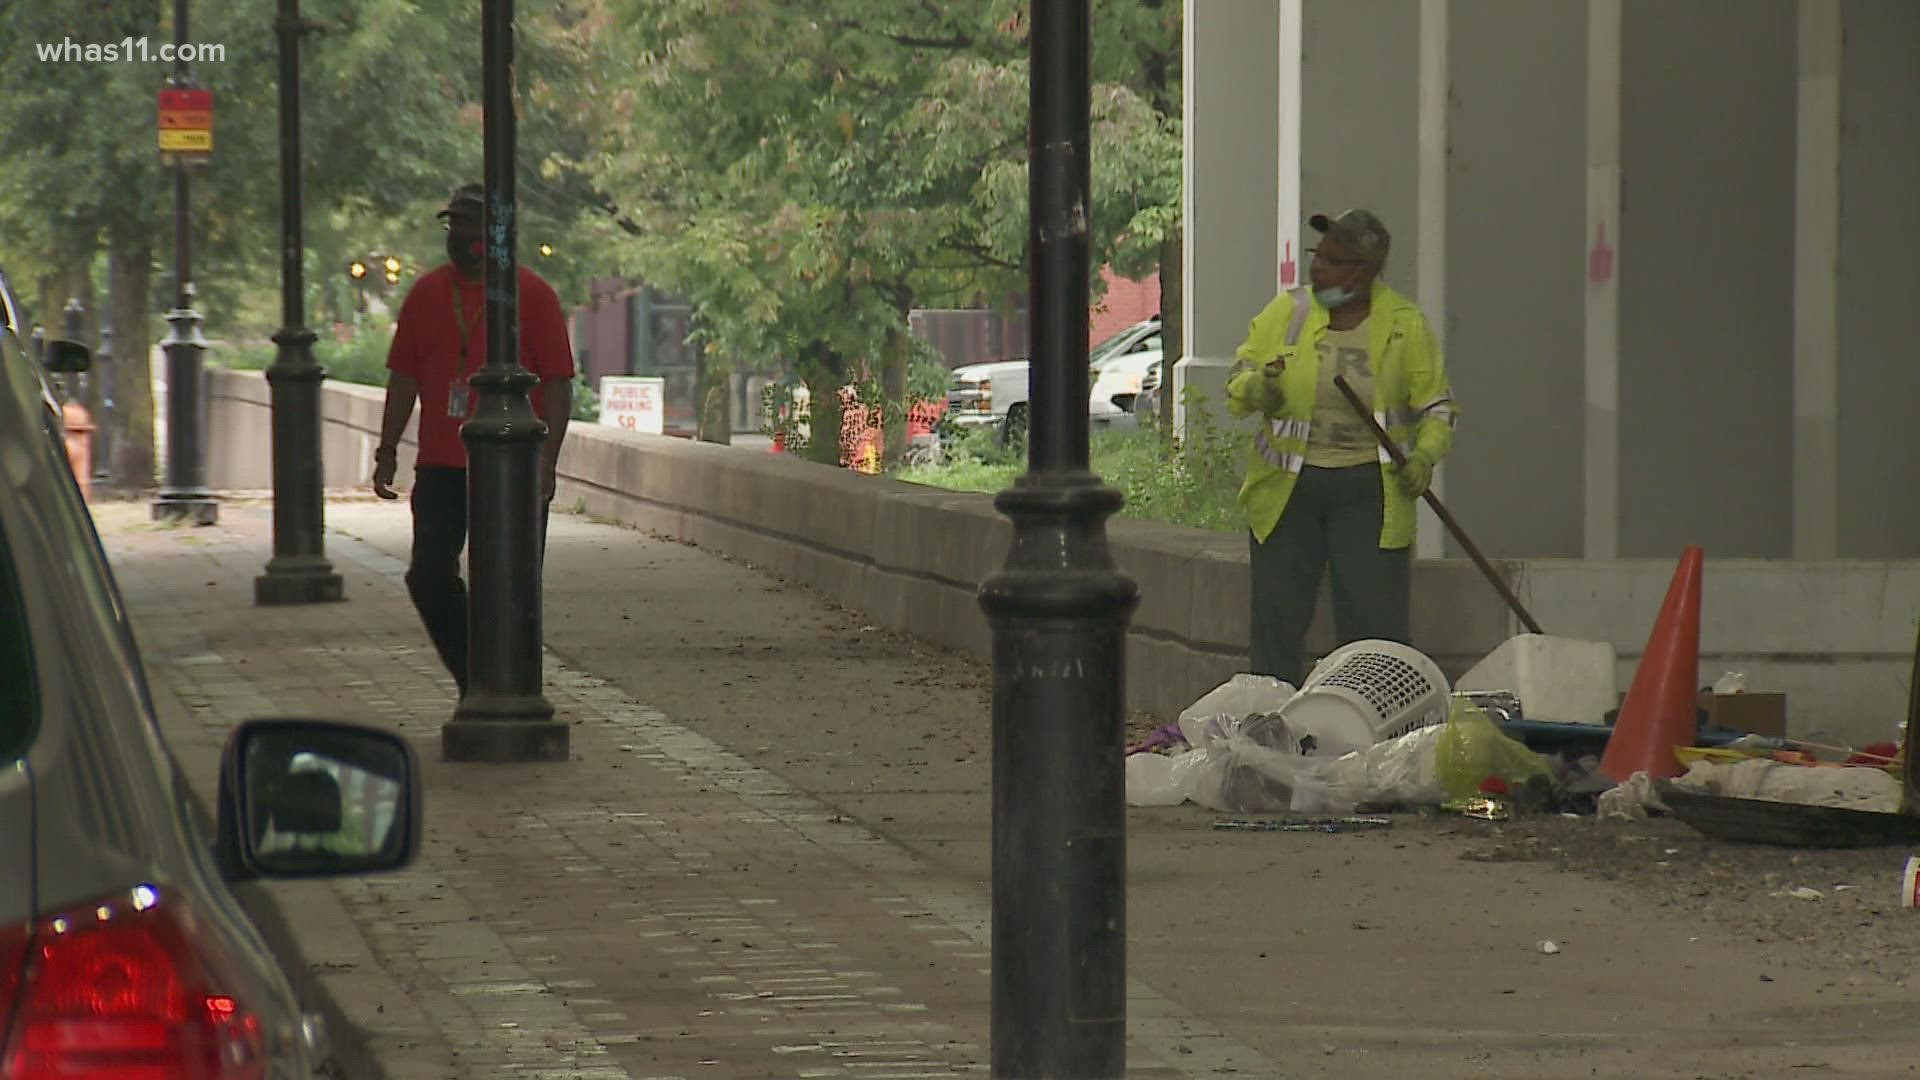 Around 40 people were cleared out of homeless camps in downtown Louisville Wednesday morning and around 16 were taken to local shelters.